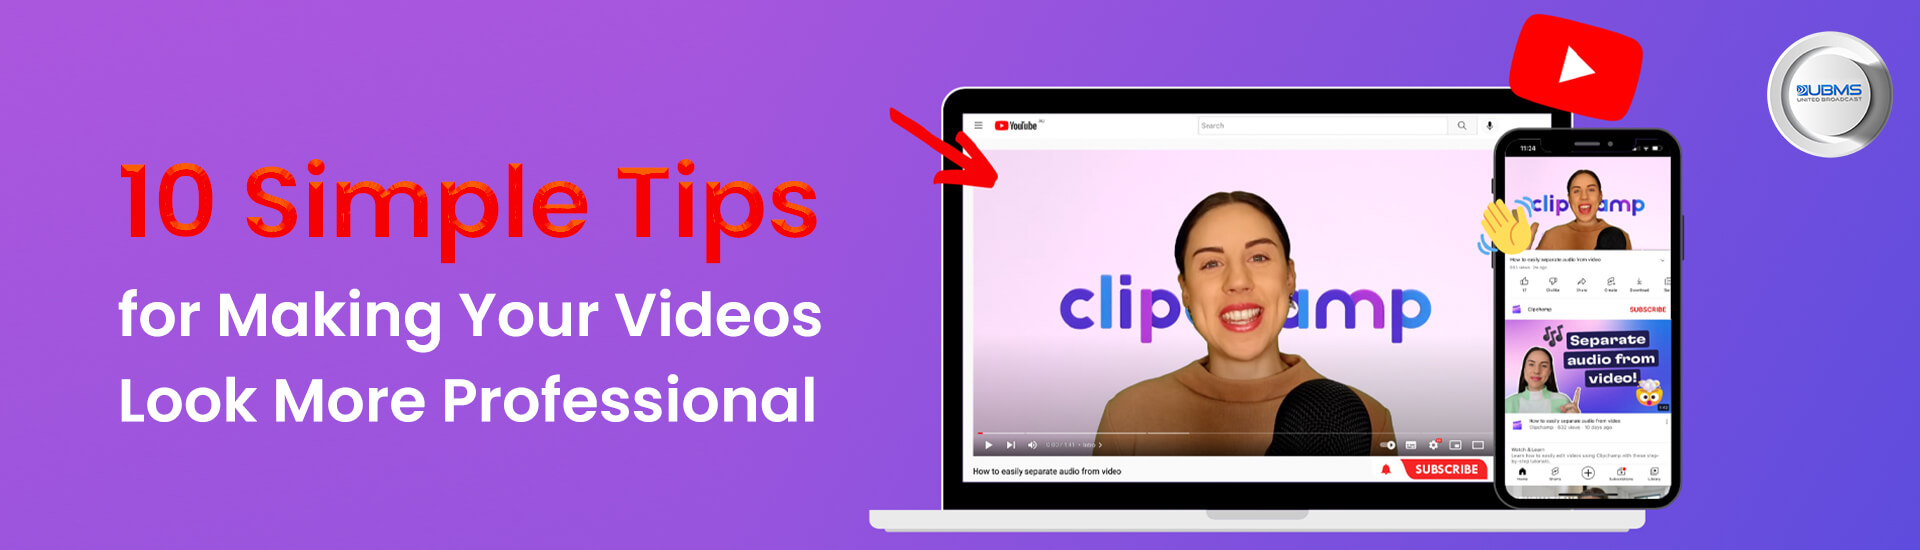 10 Tips for Making Your Videos Look More Professional